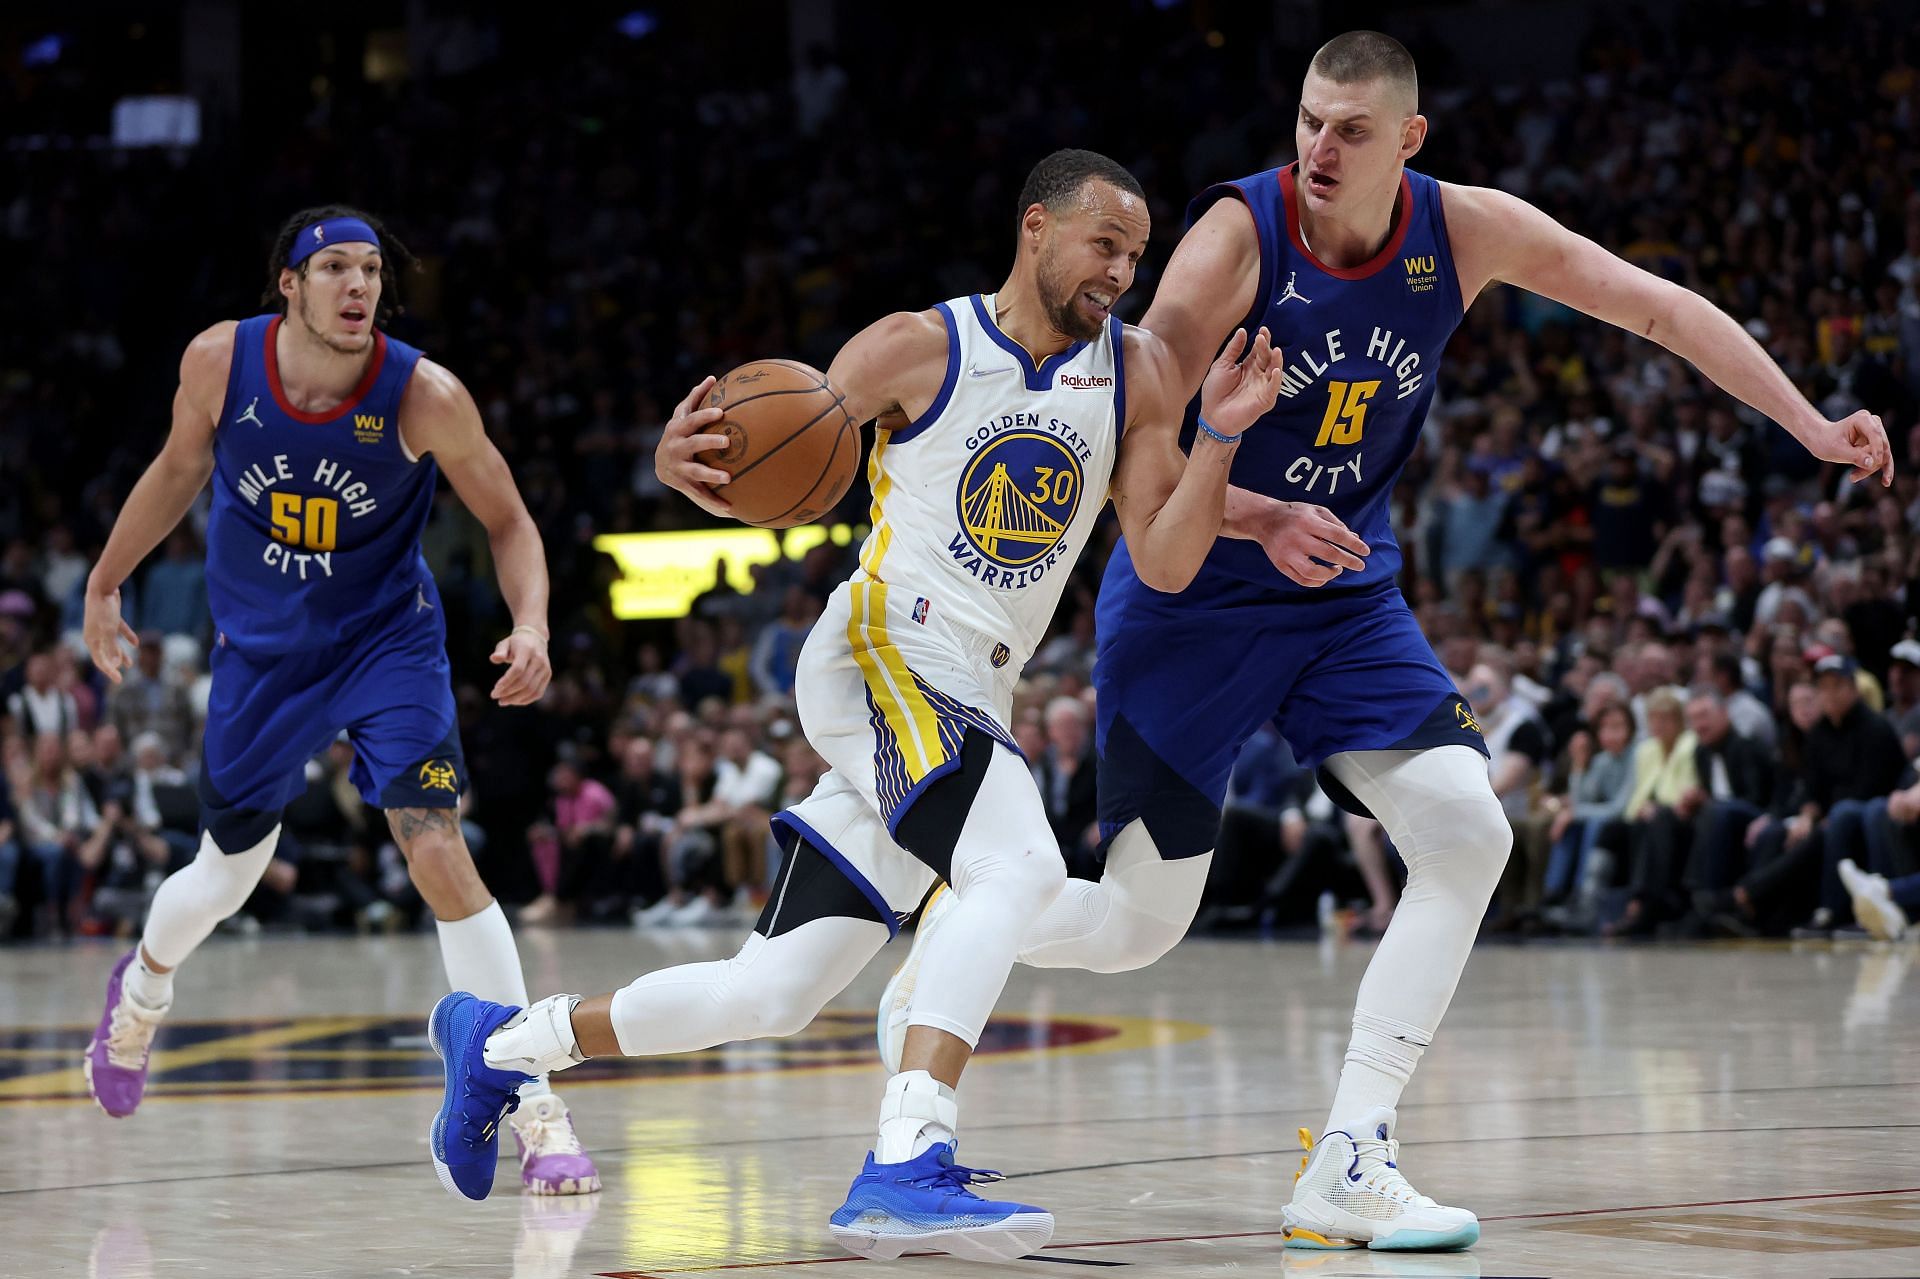 Steph Curry had 27 points for the Golden State Warriors vs. the Denver Nuggets in Game 3.